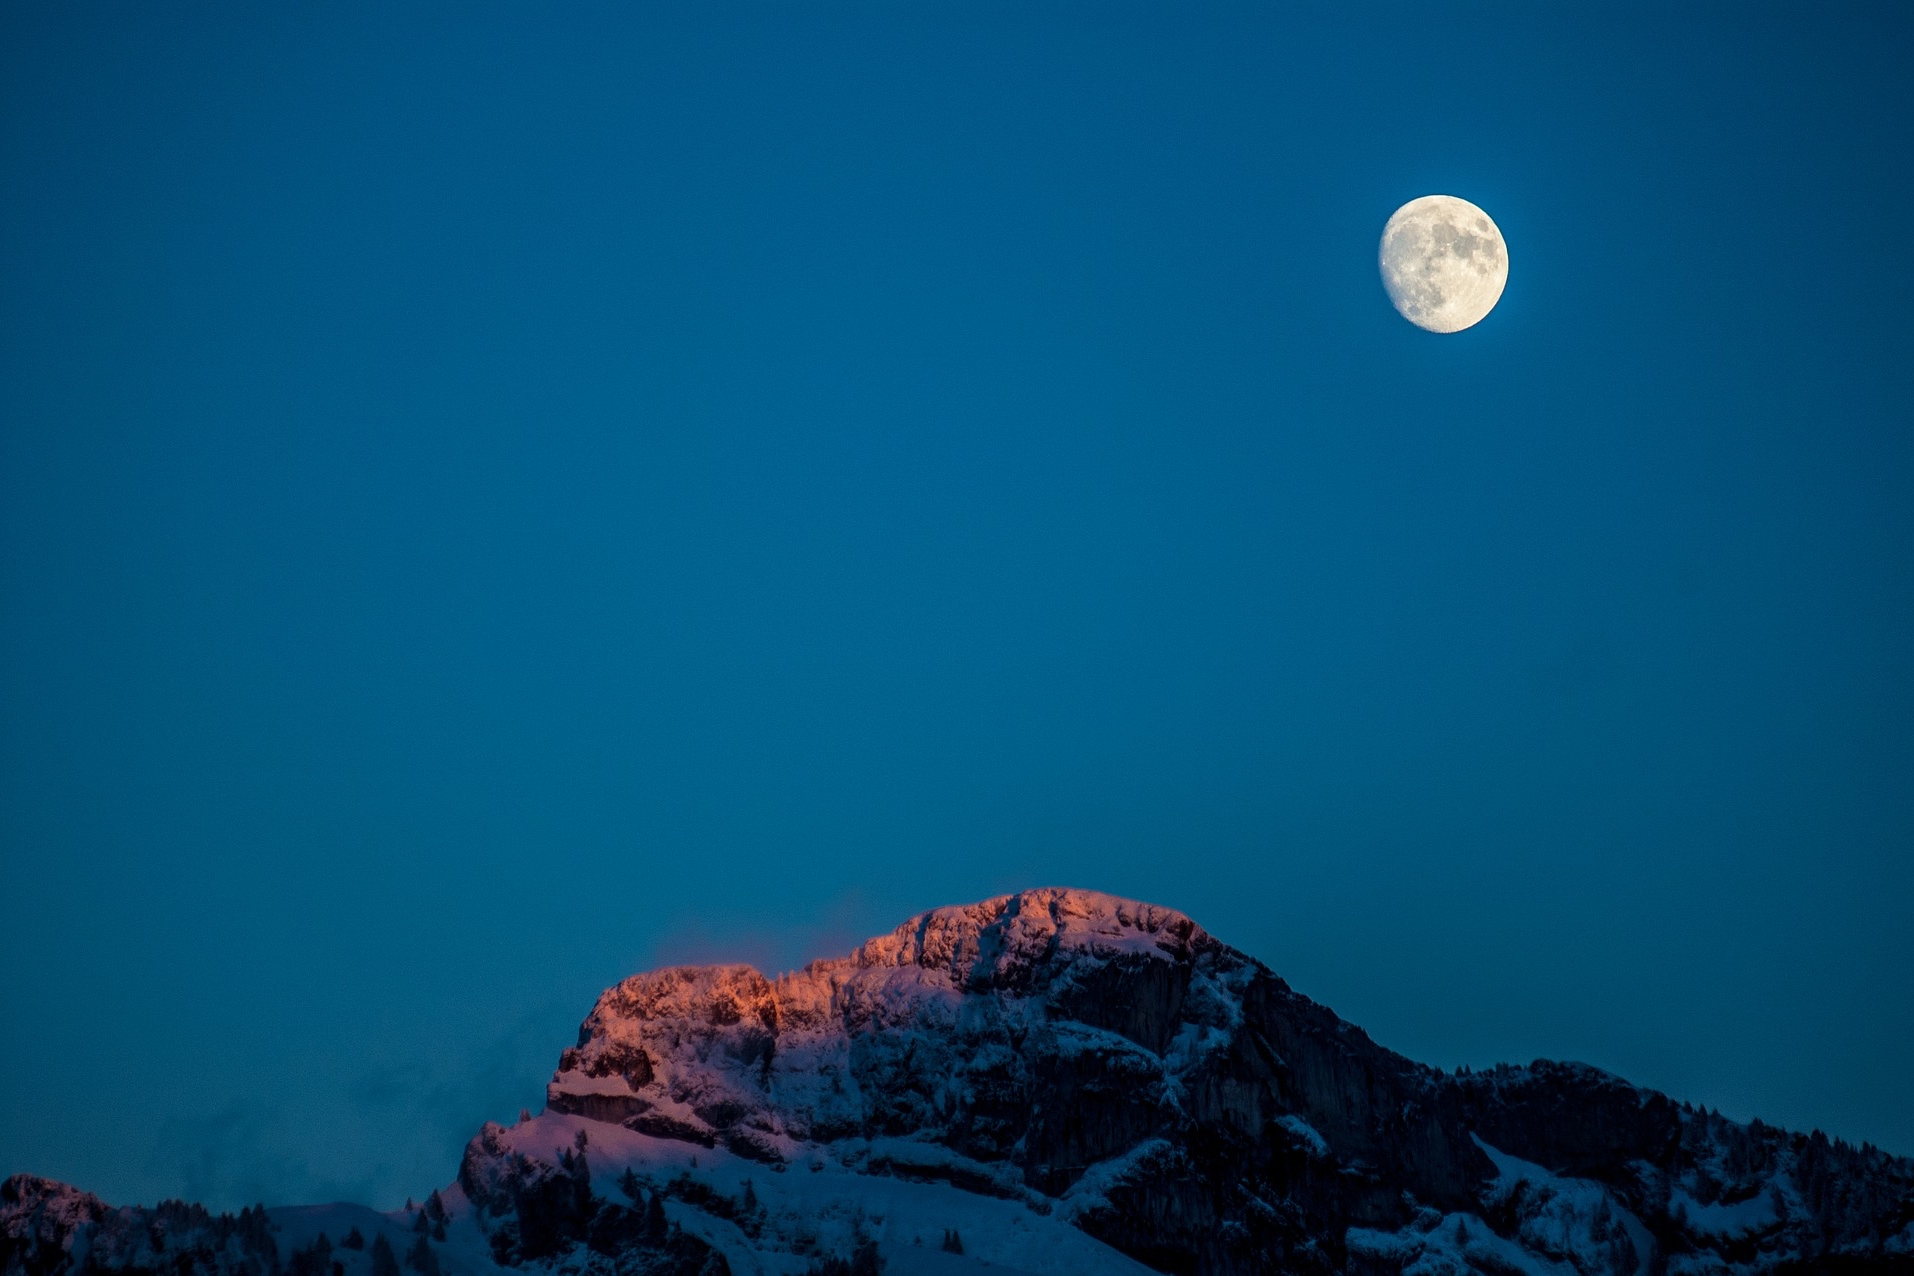 Moon over snowy mountains